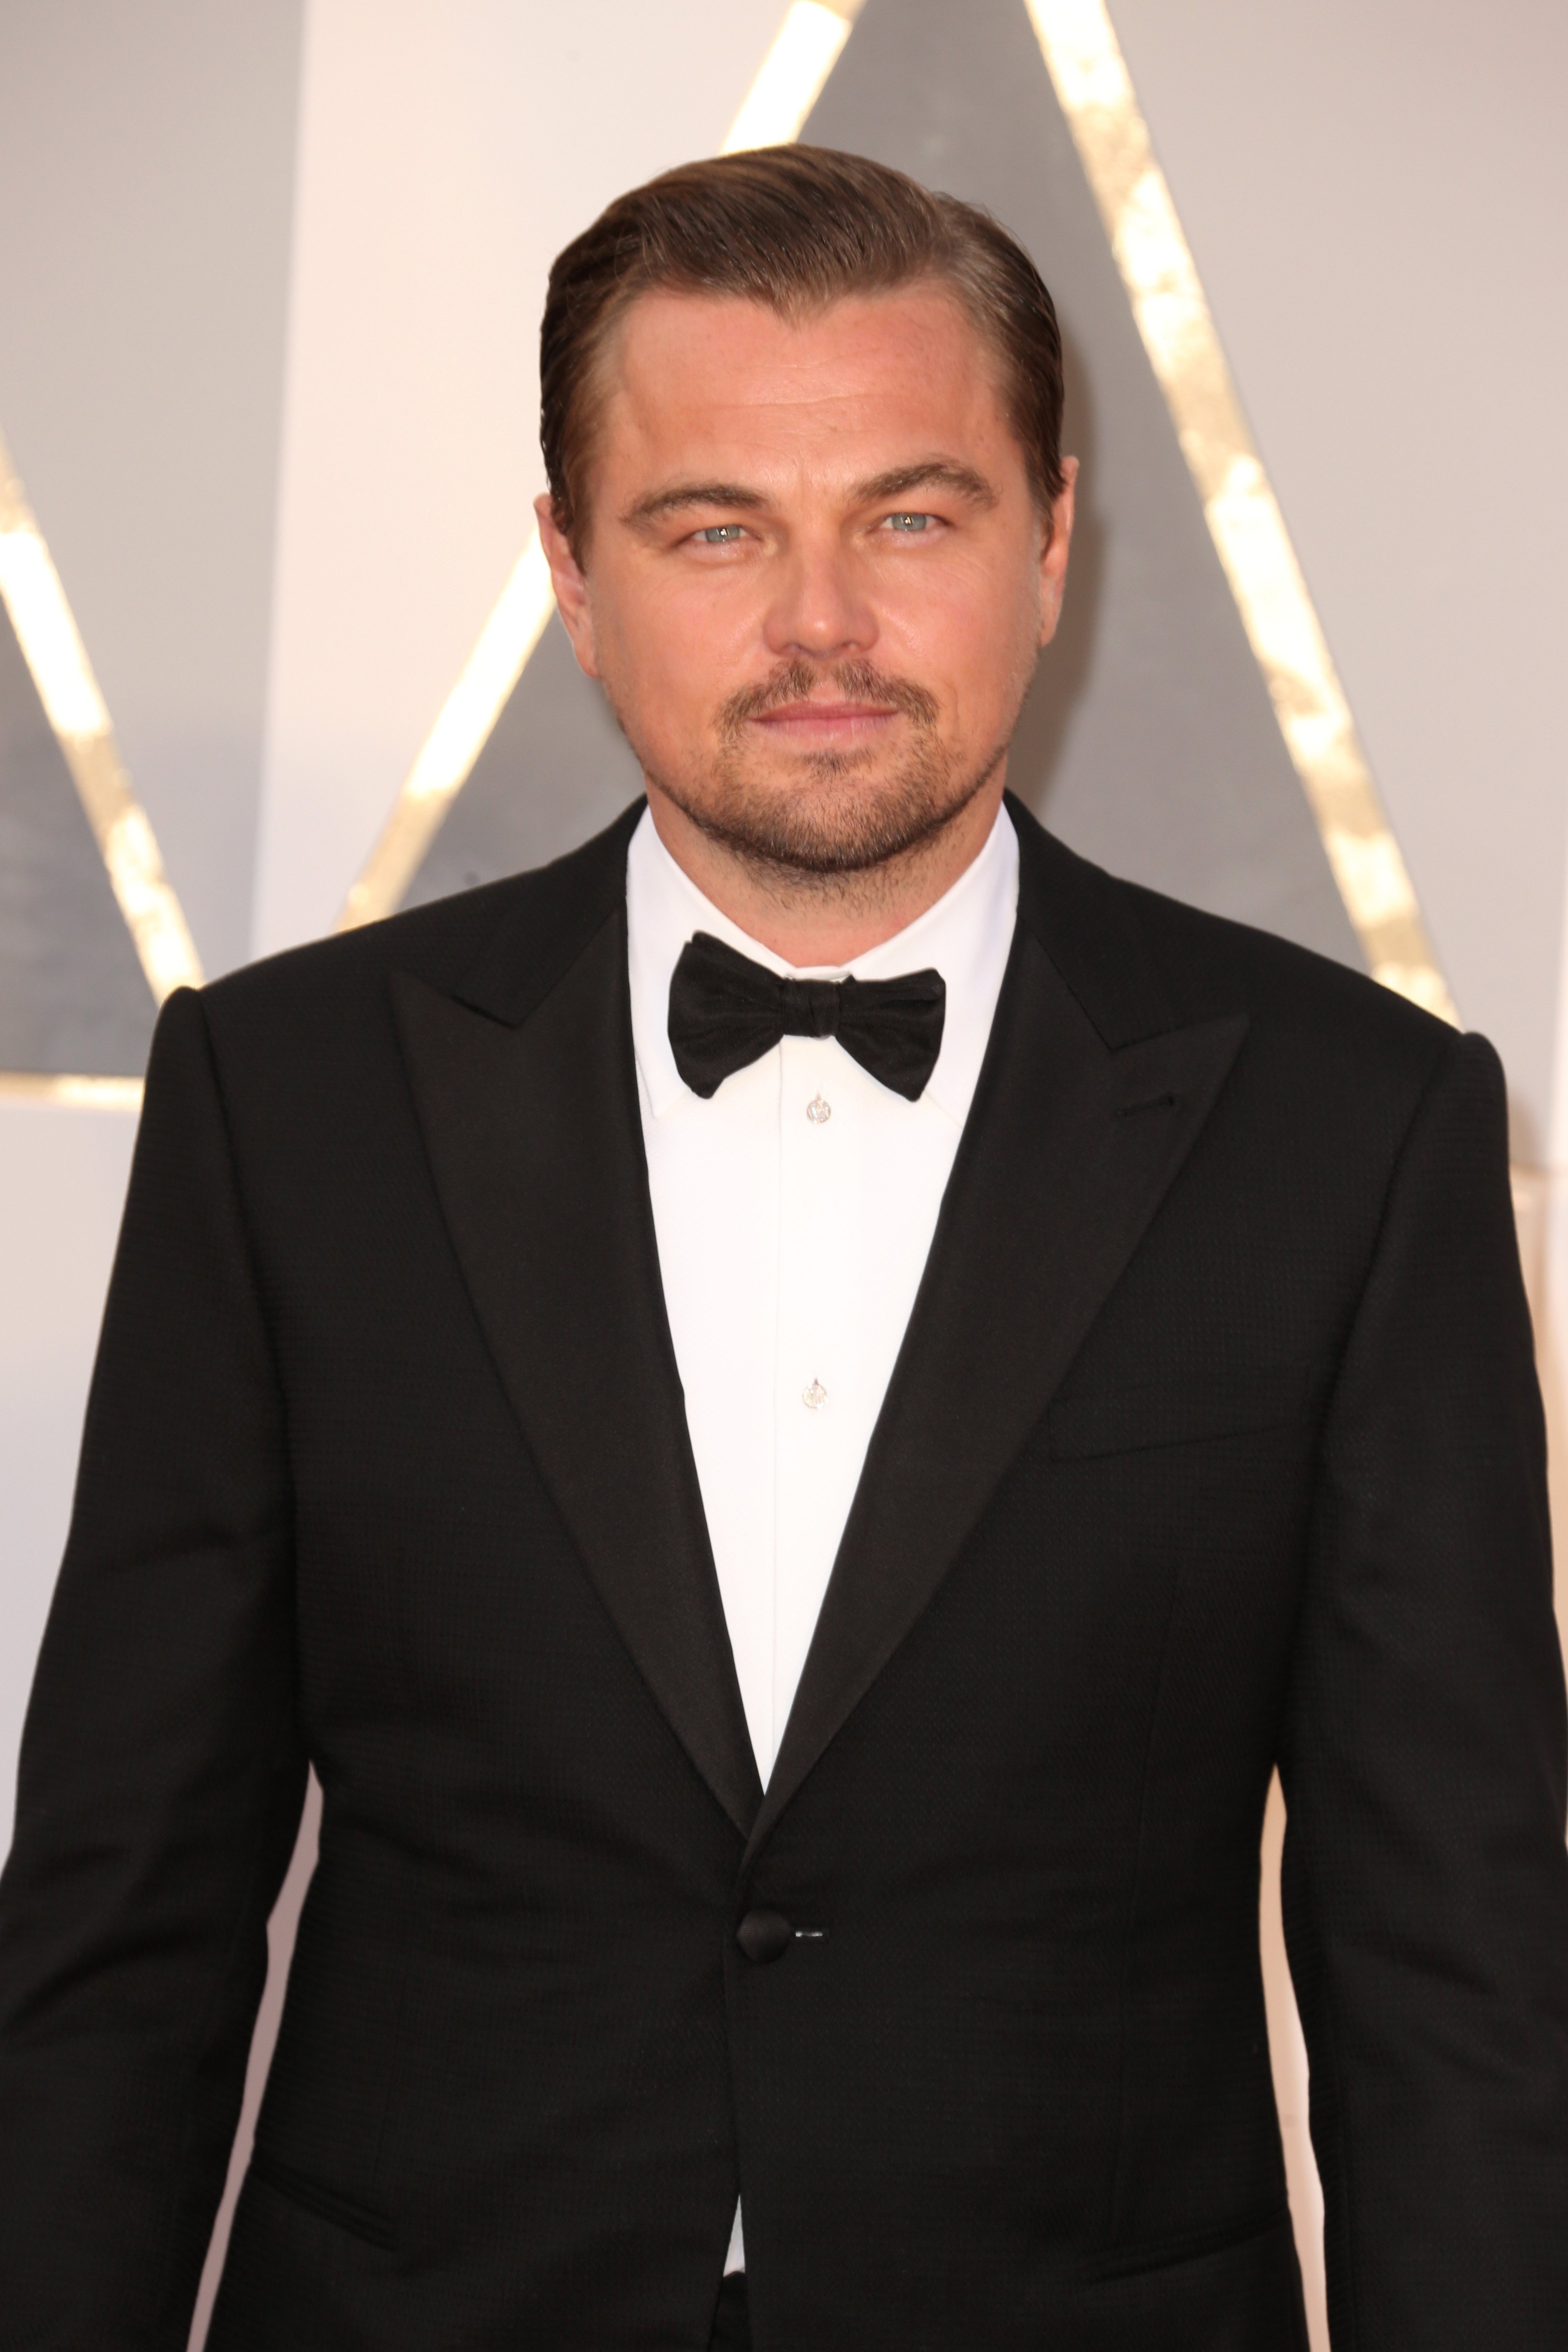 Leonardo DiCaprio attends the 88th Annual Academy Awards at Hollywood & Highland Center on February 28, 2016, in Hollywood, California. | Source: Getty Images